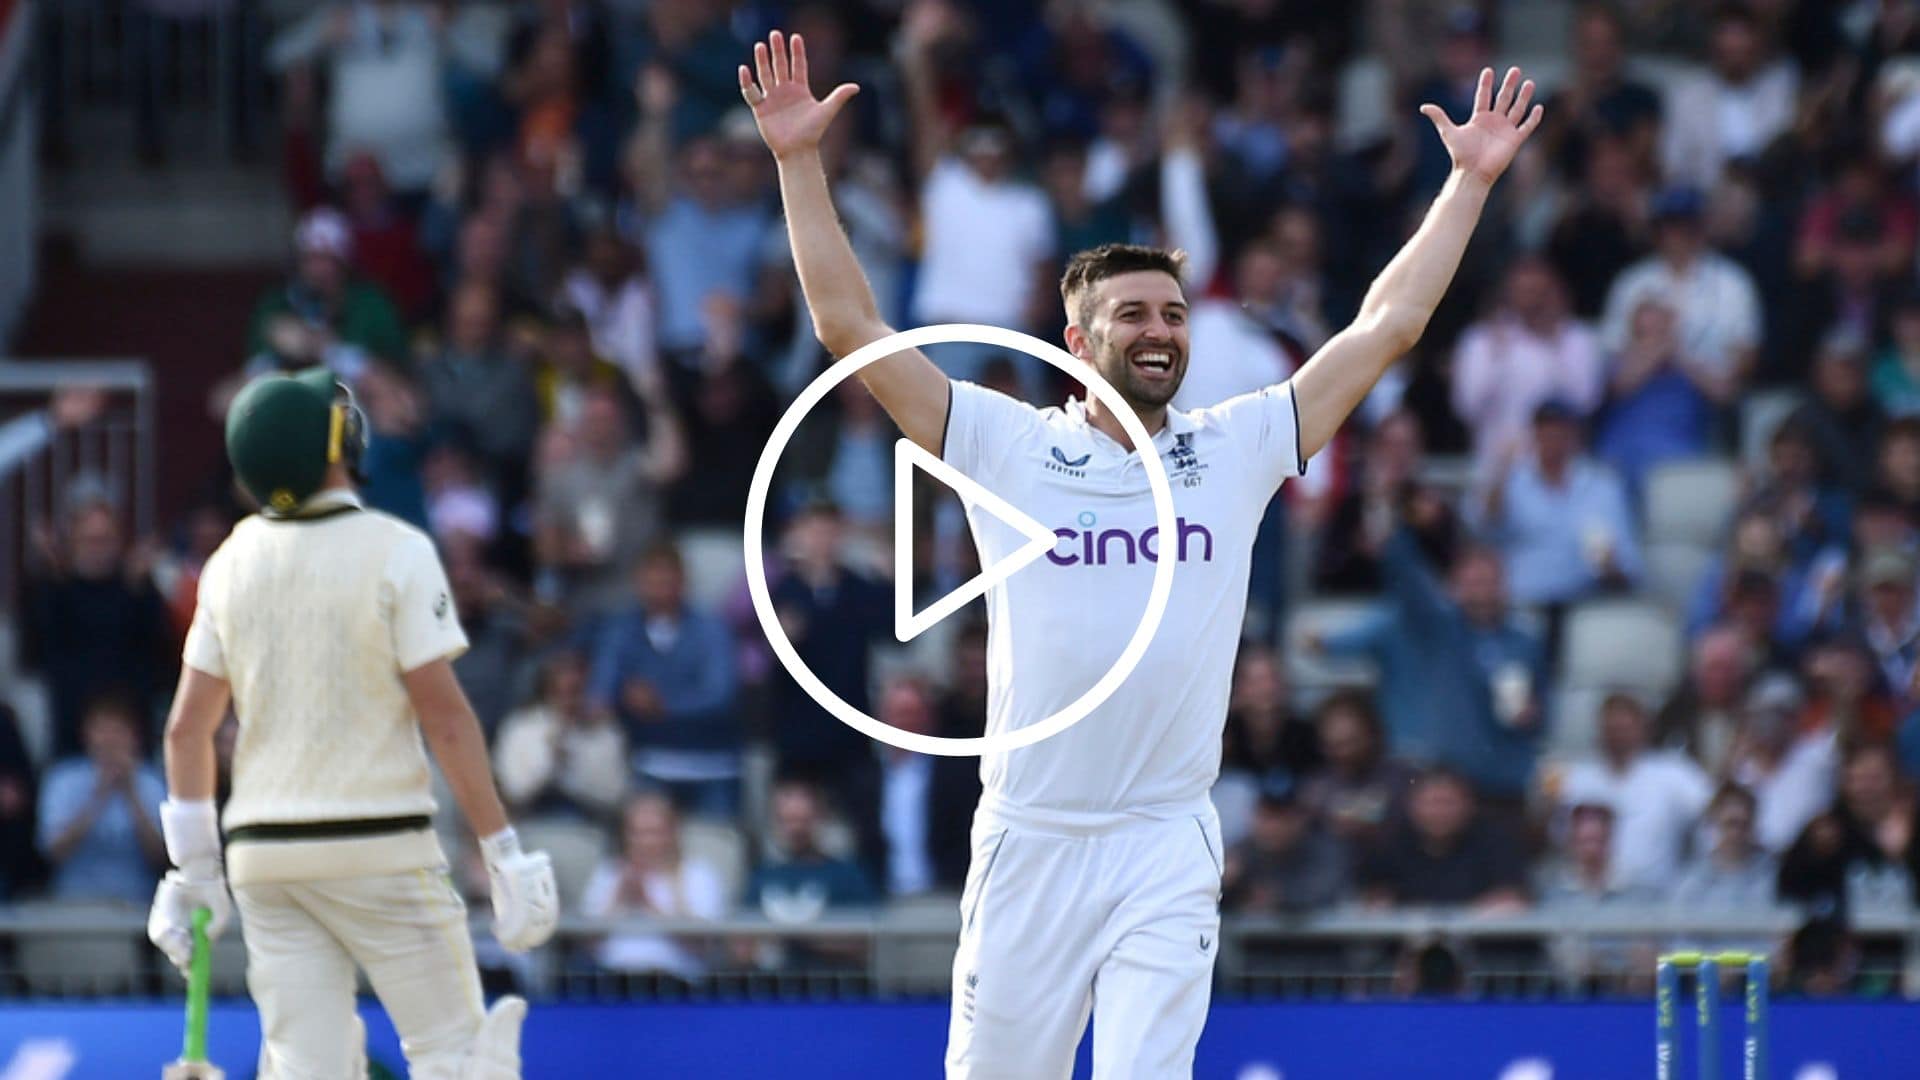 [Watch] Mark Wood Marks His 100th Test Wicket With A Deadly Bouncer To Steve Smith